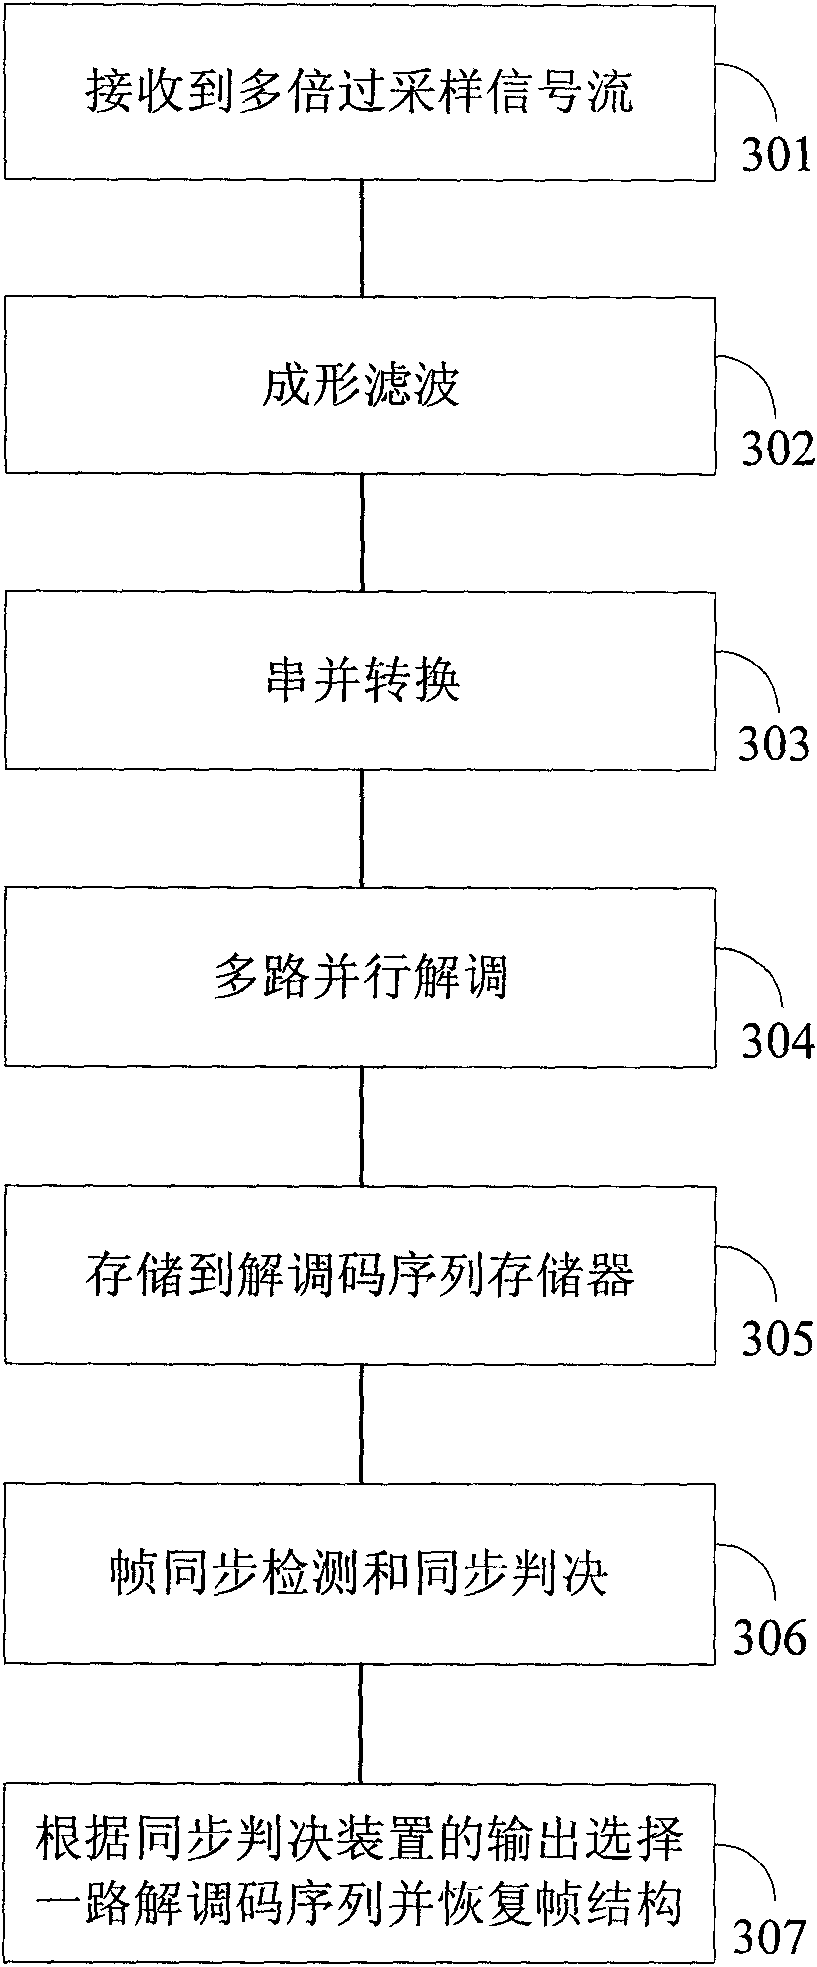 Base band receiver of base station in digital wireless trunking communication system based on TDMA (Time Division Multiple Address) technique and signal processing method thereof